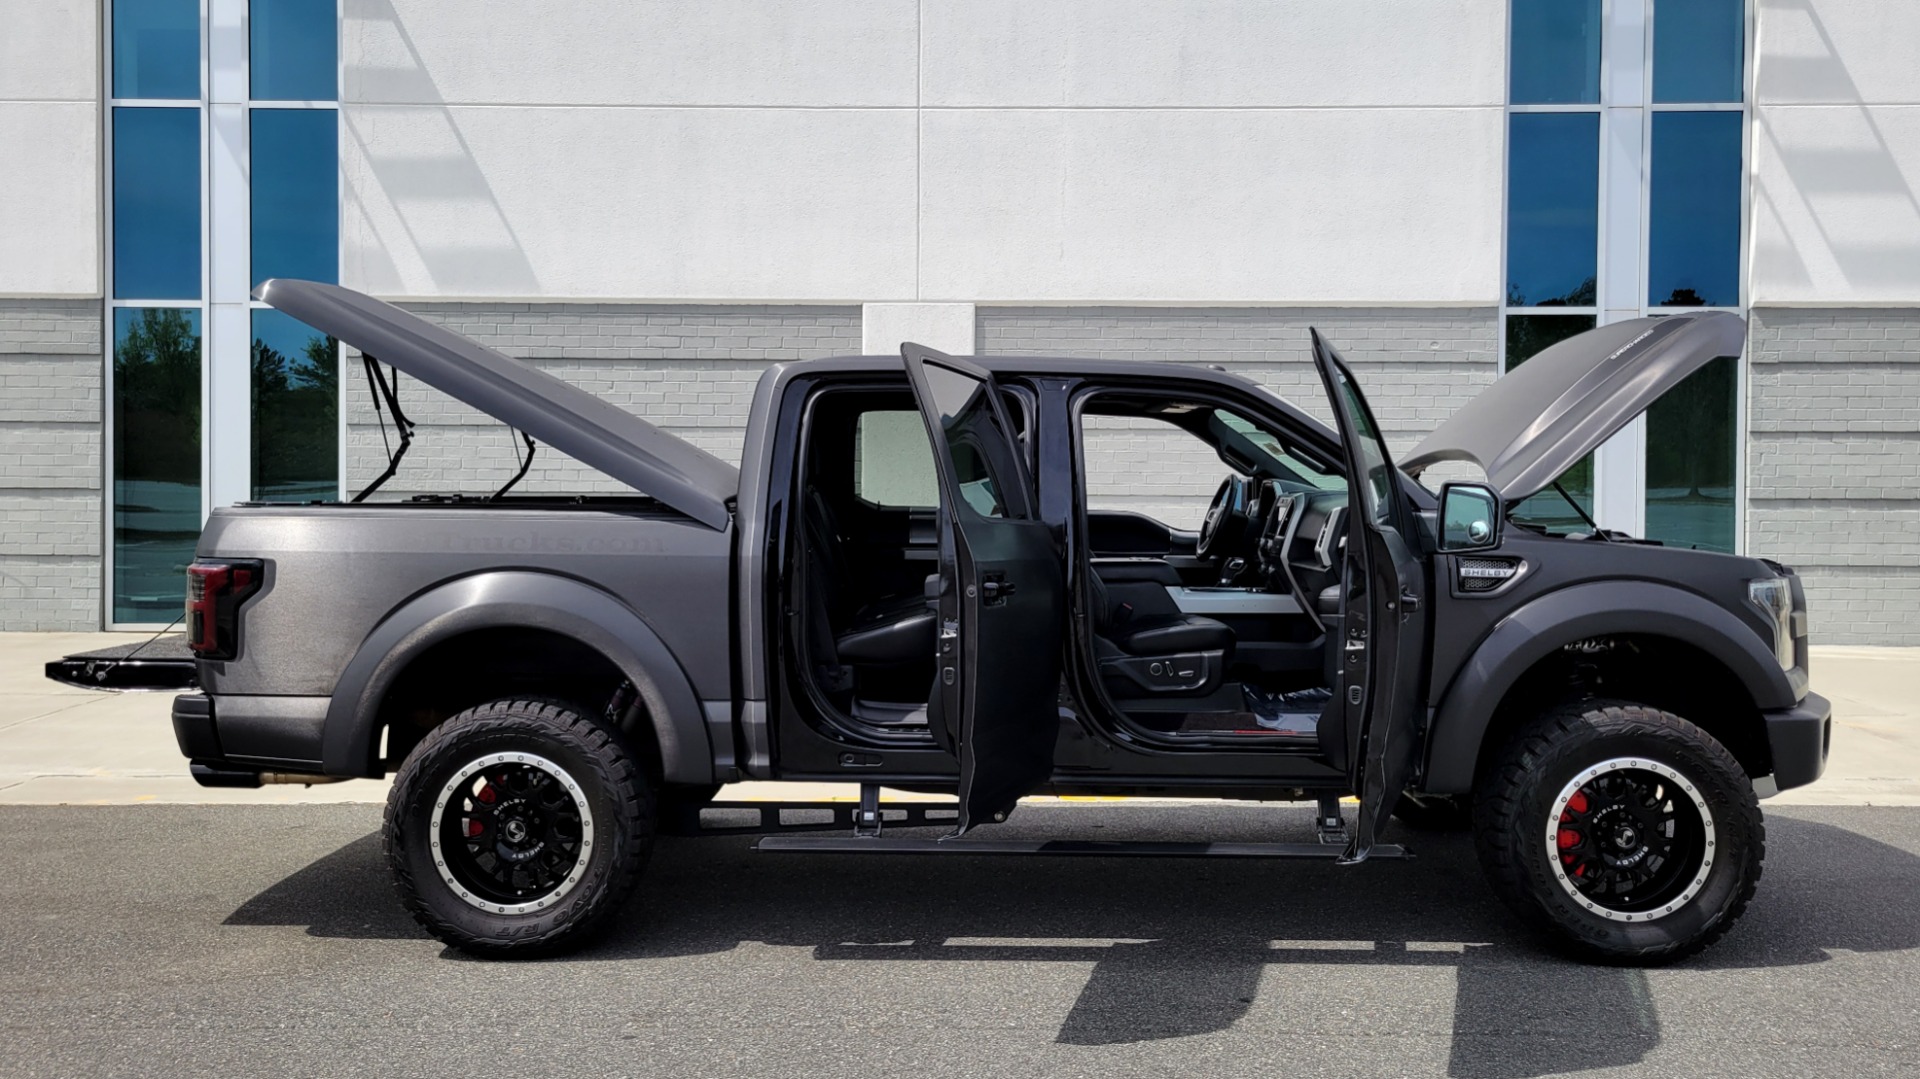 Used 2017 Ford F-150 SHELBY 750HP LARIAT 4X4 SUPERCREW / SUNROOF / BLIS / TECHNOLOGY for sale $59,999 at Formula Imports in Charlotte NC 28227 25